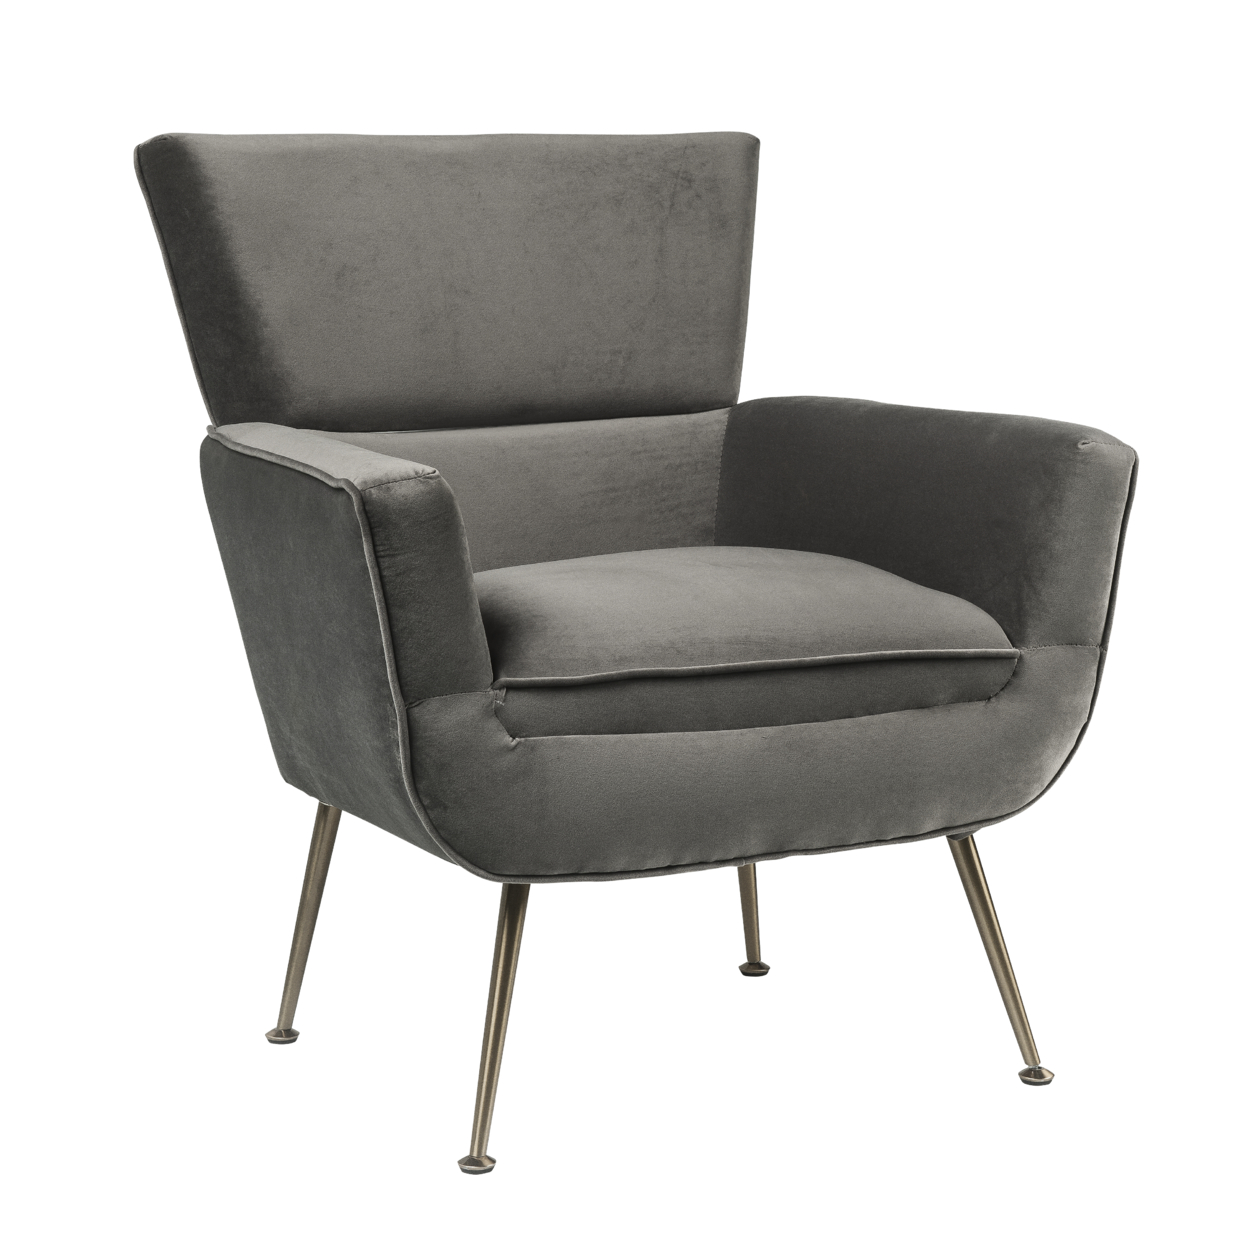 Fabric Upholstered Accent Chair With Angled Legs And Flared Armrests, Gray- Saltoro Sherpi